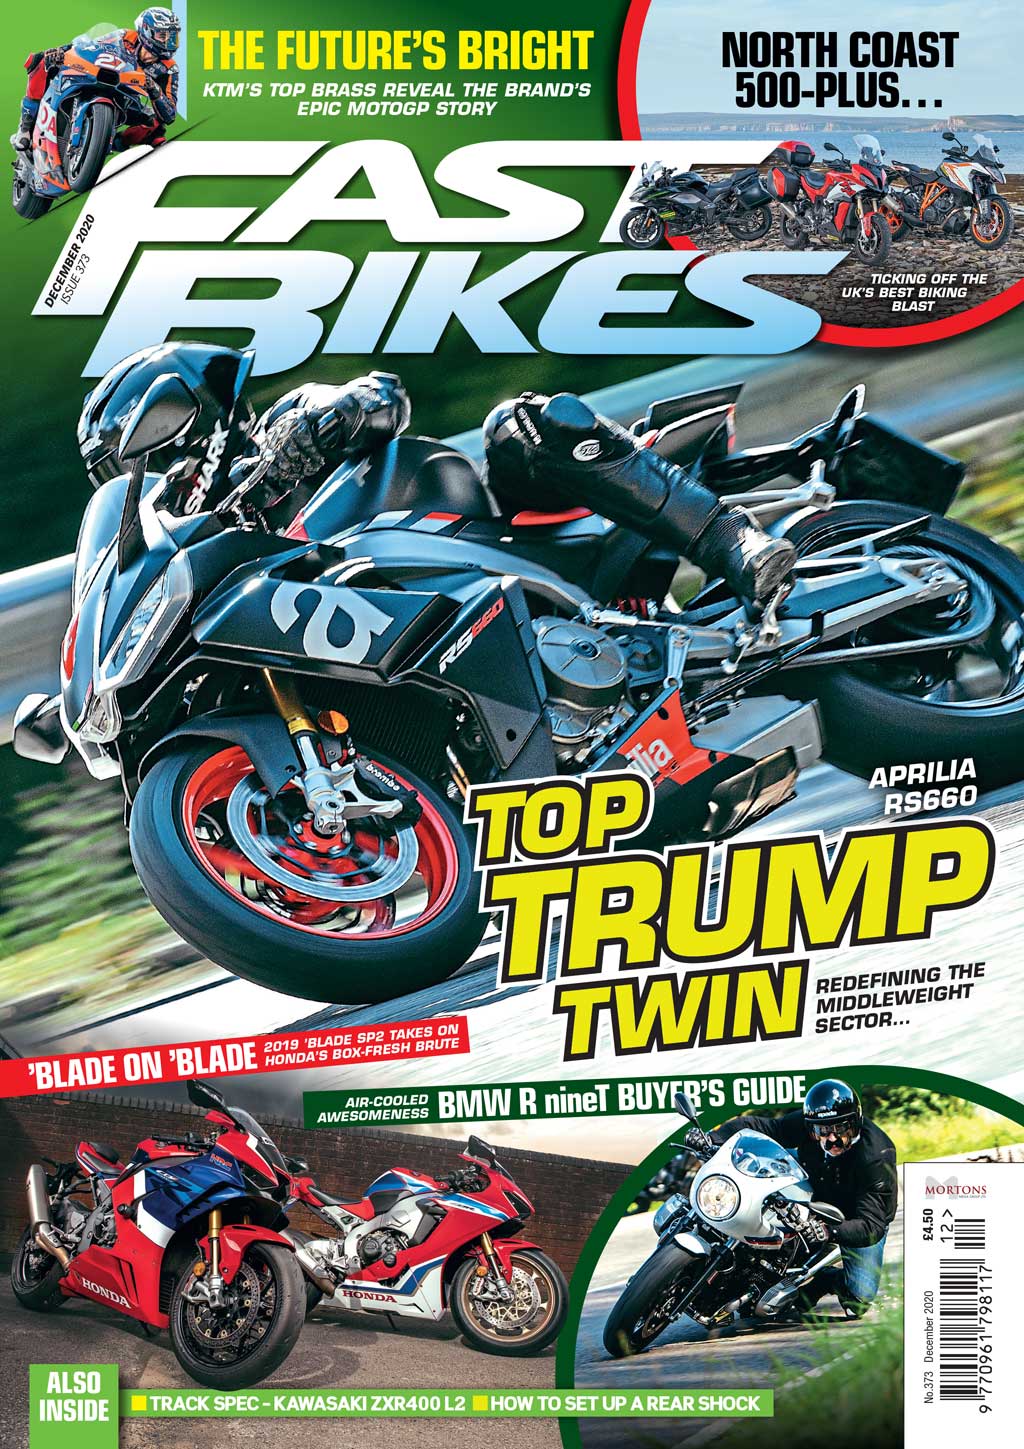 PREVIEW: December issue of Fast Bikes magazine